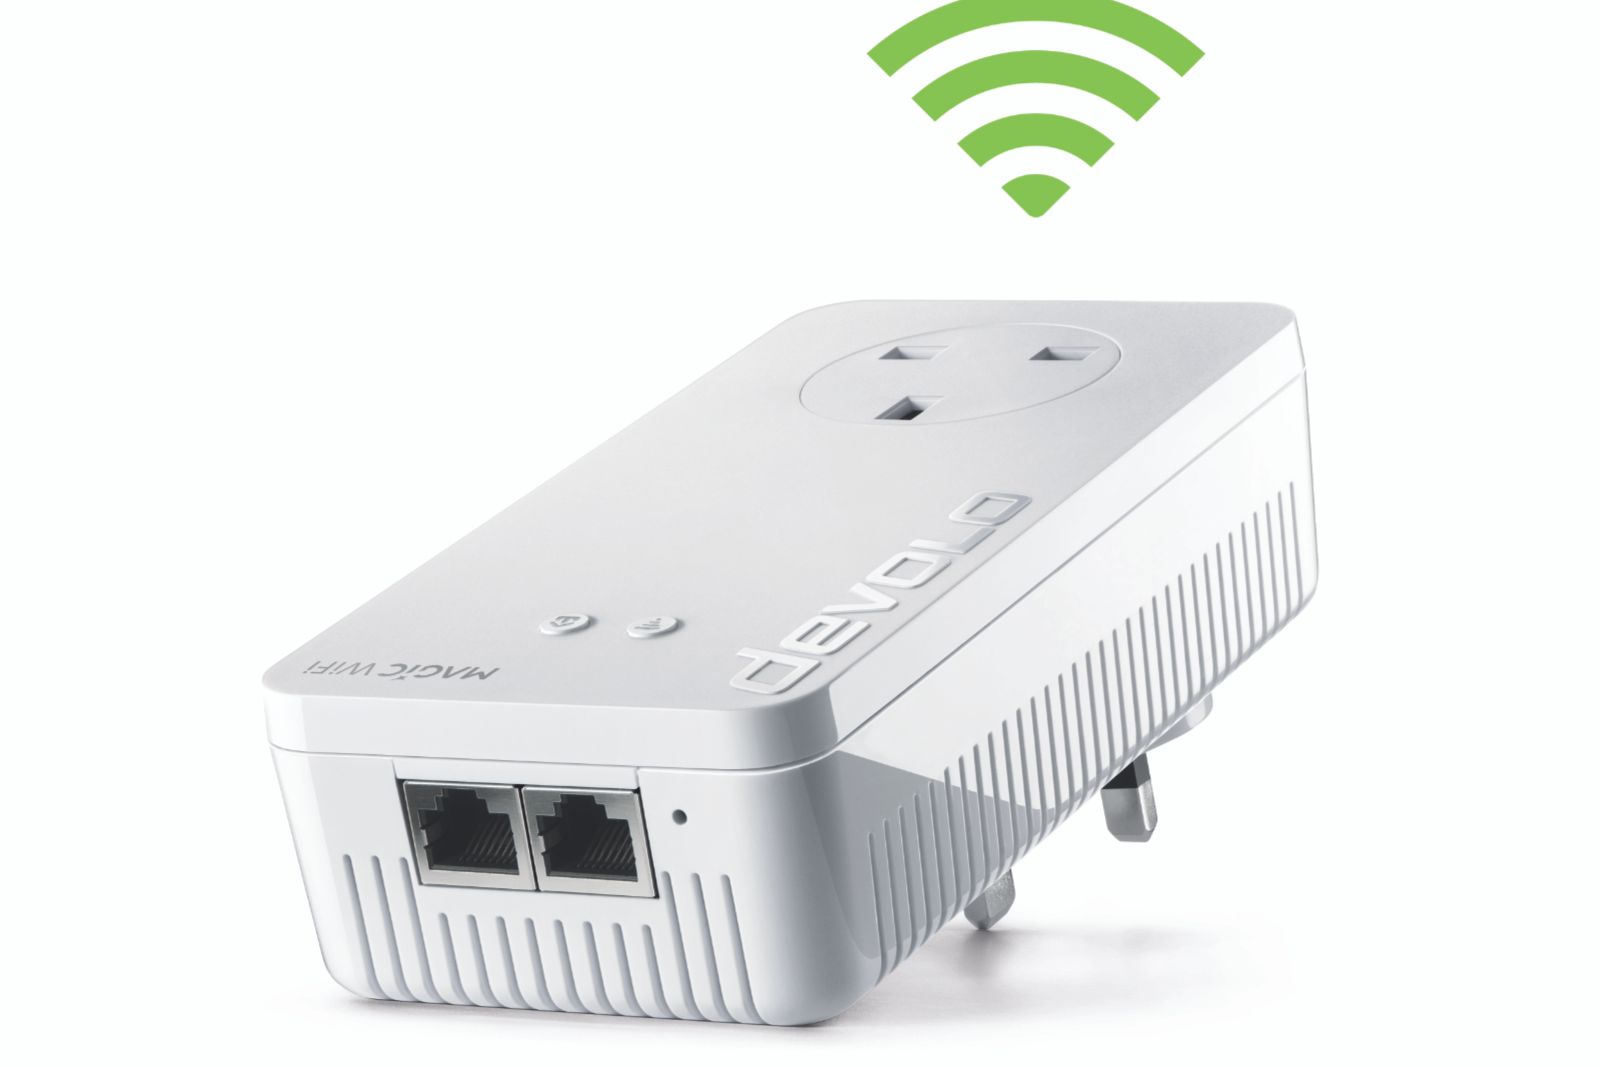 How to get strong wifi in every room: How Devolo's Magic 2 WiFi next kit extends your existing Wi-Fi photo 1